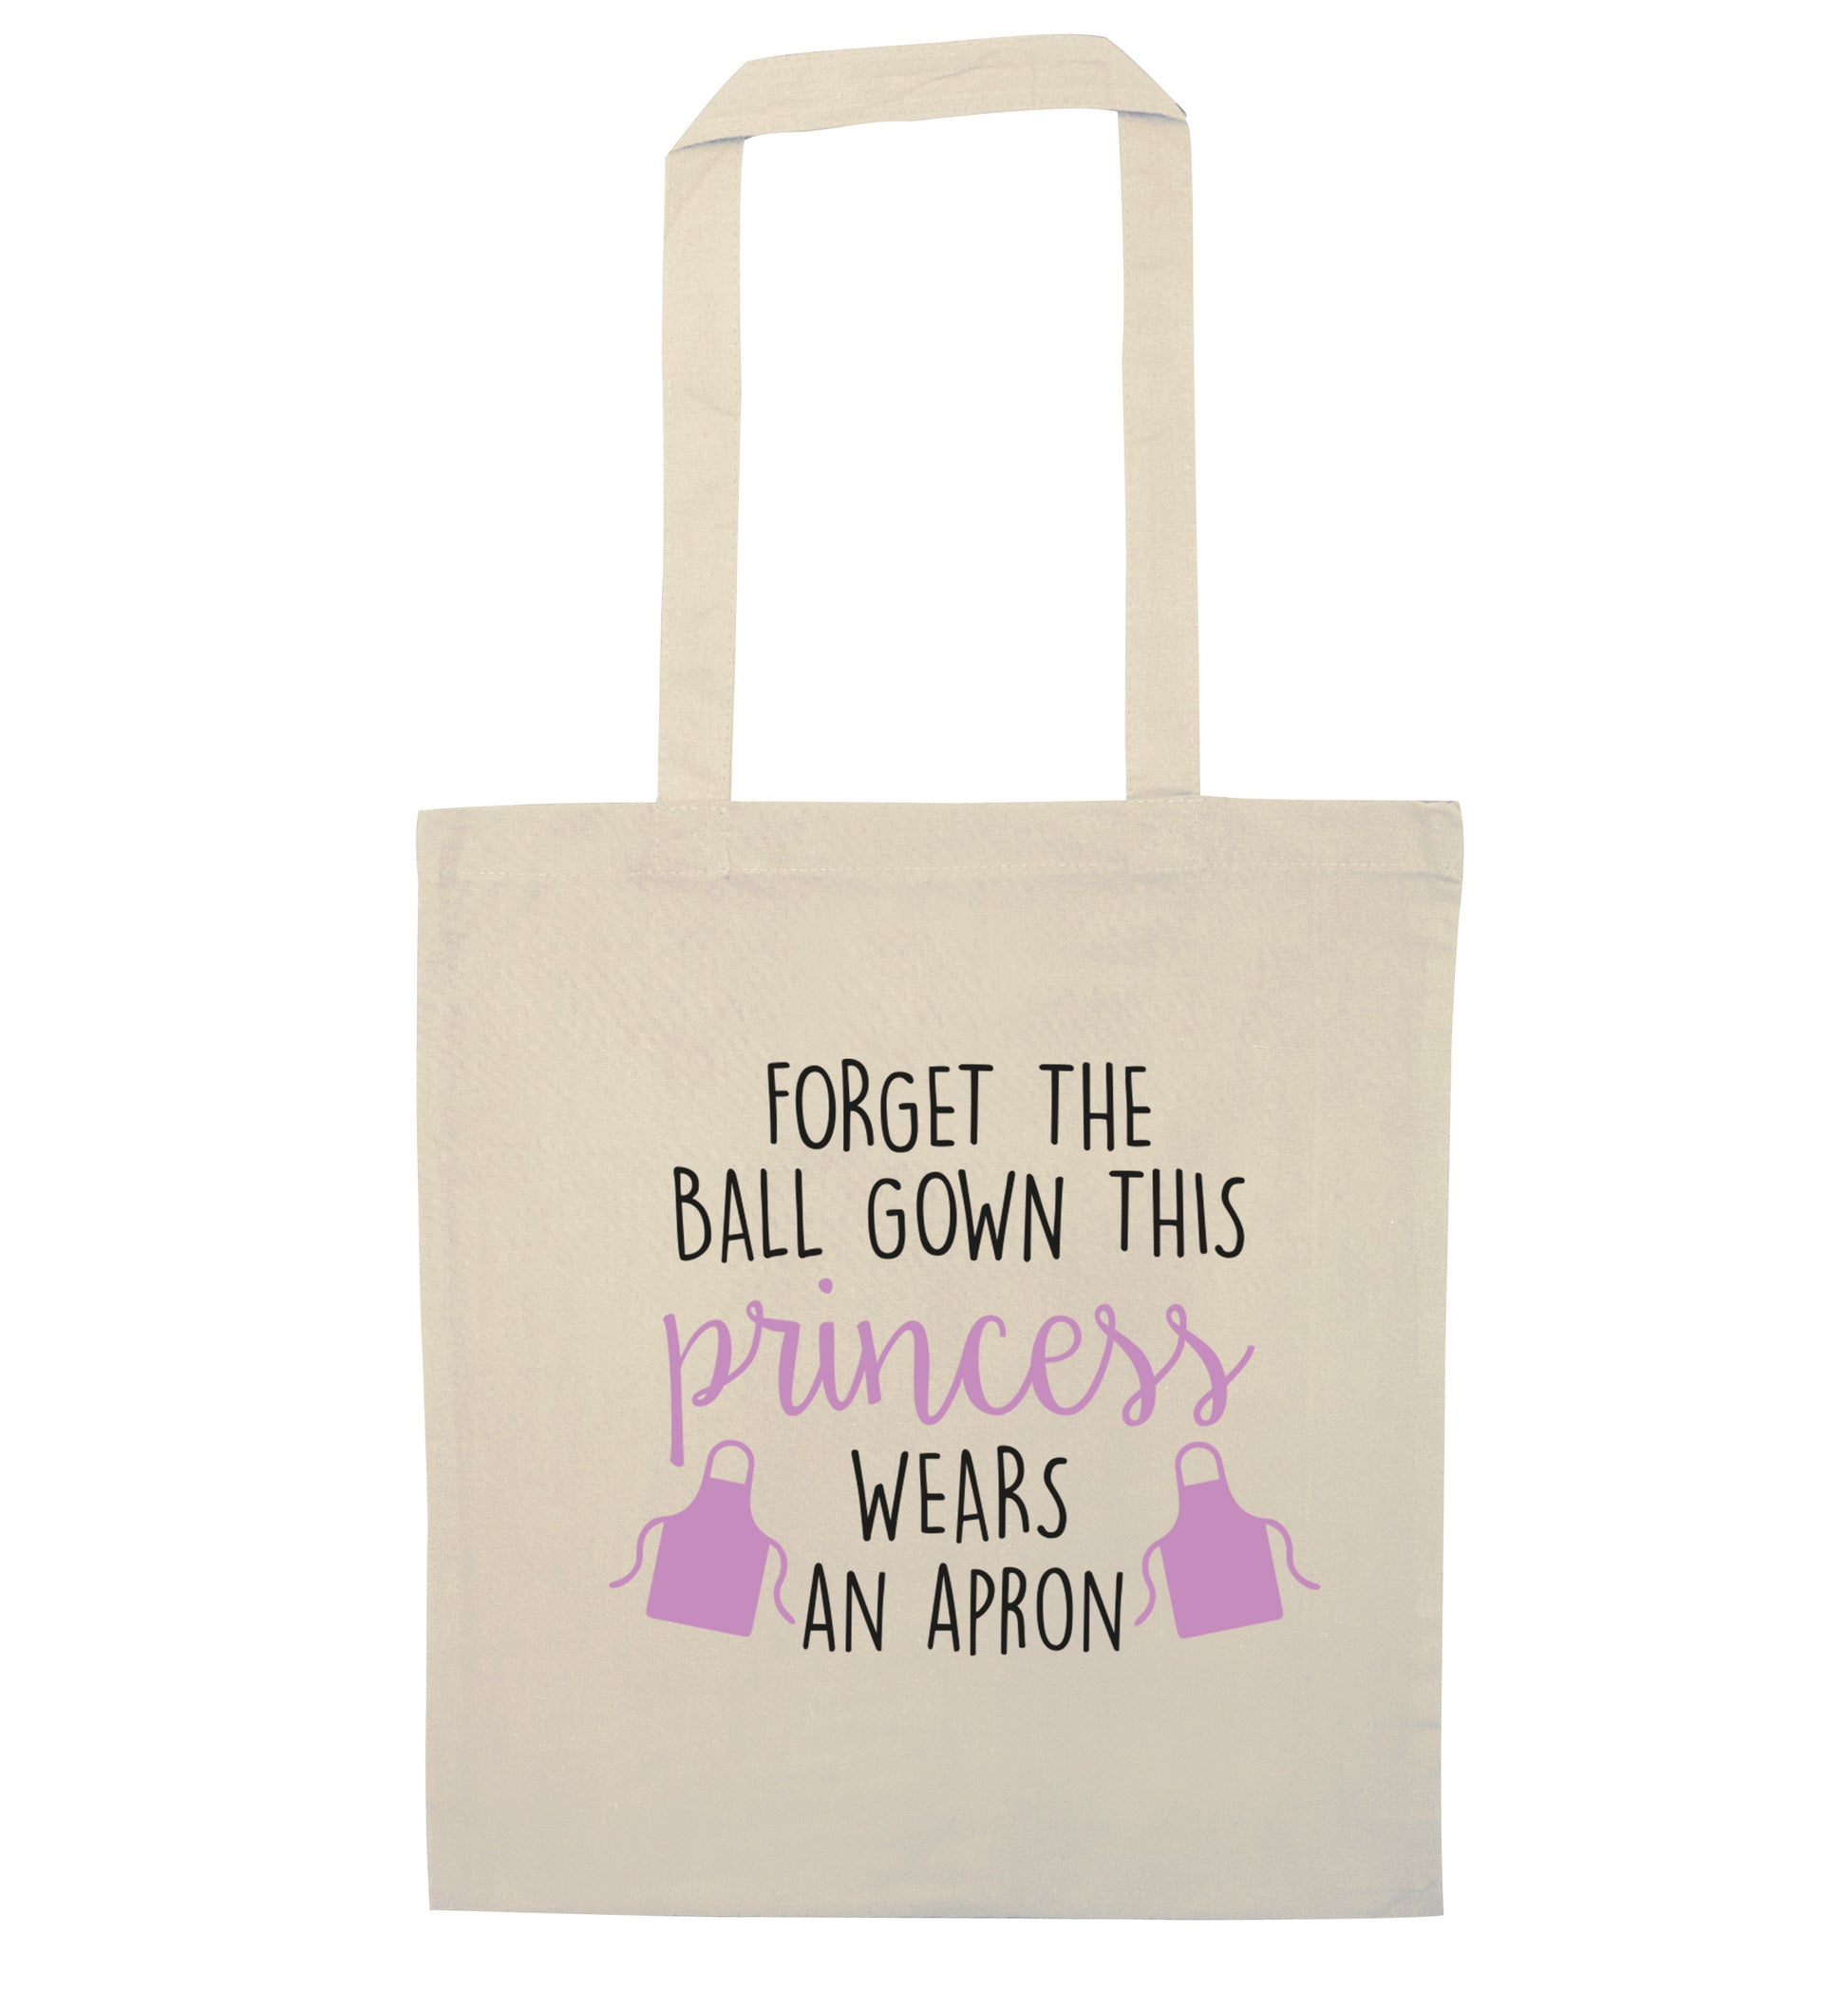 Forget the ball gown this princess wears an apron natural tote bag